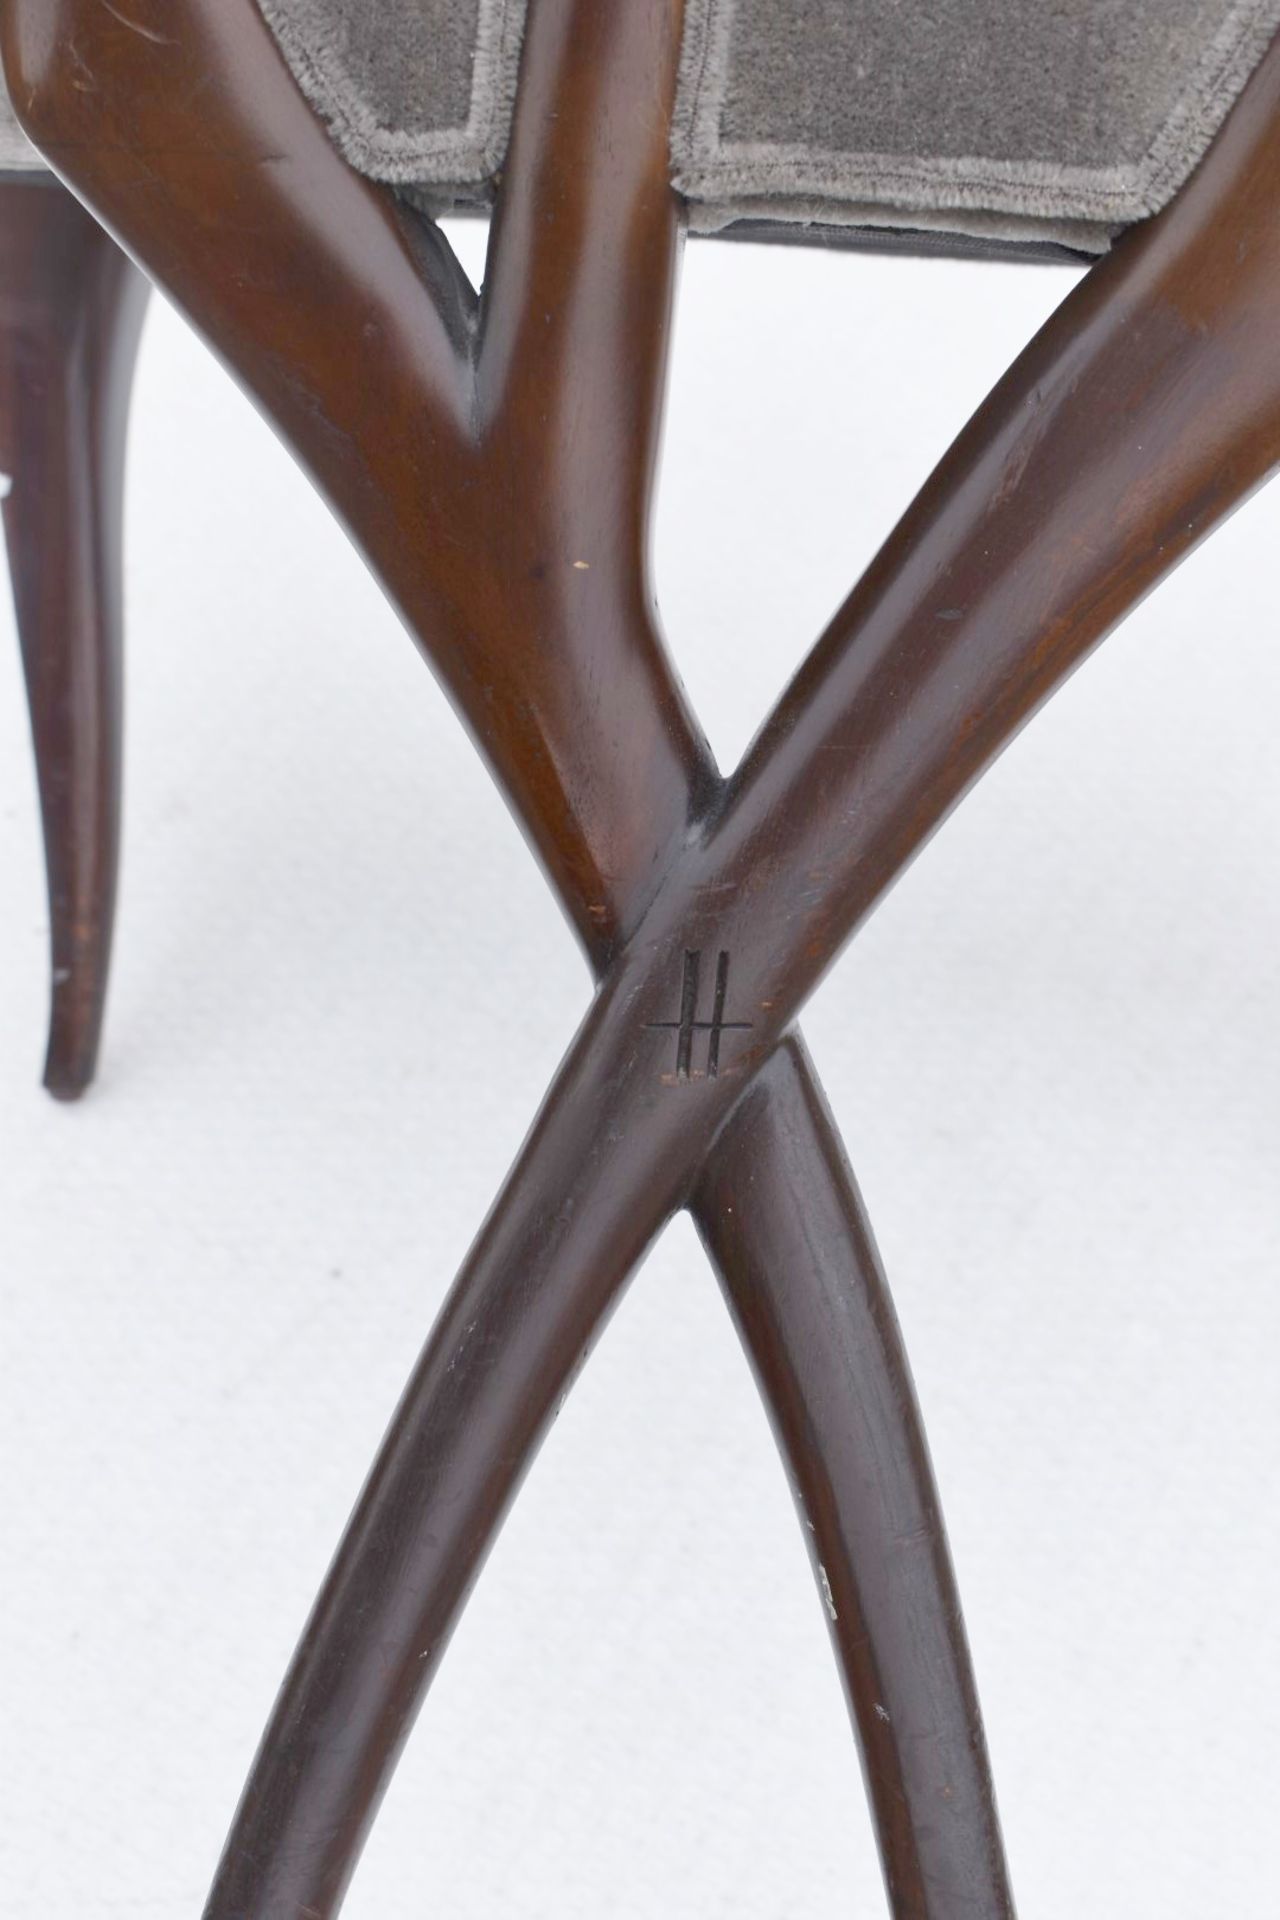 1 x CHRISTOPHER GUY 'Le Jardin' Luxury Hand-carved Solid Mahogany Designer Dining Chair - Recently - Image 9 of 11